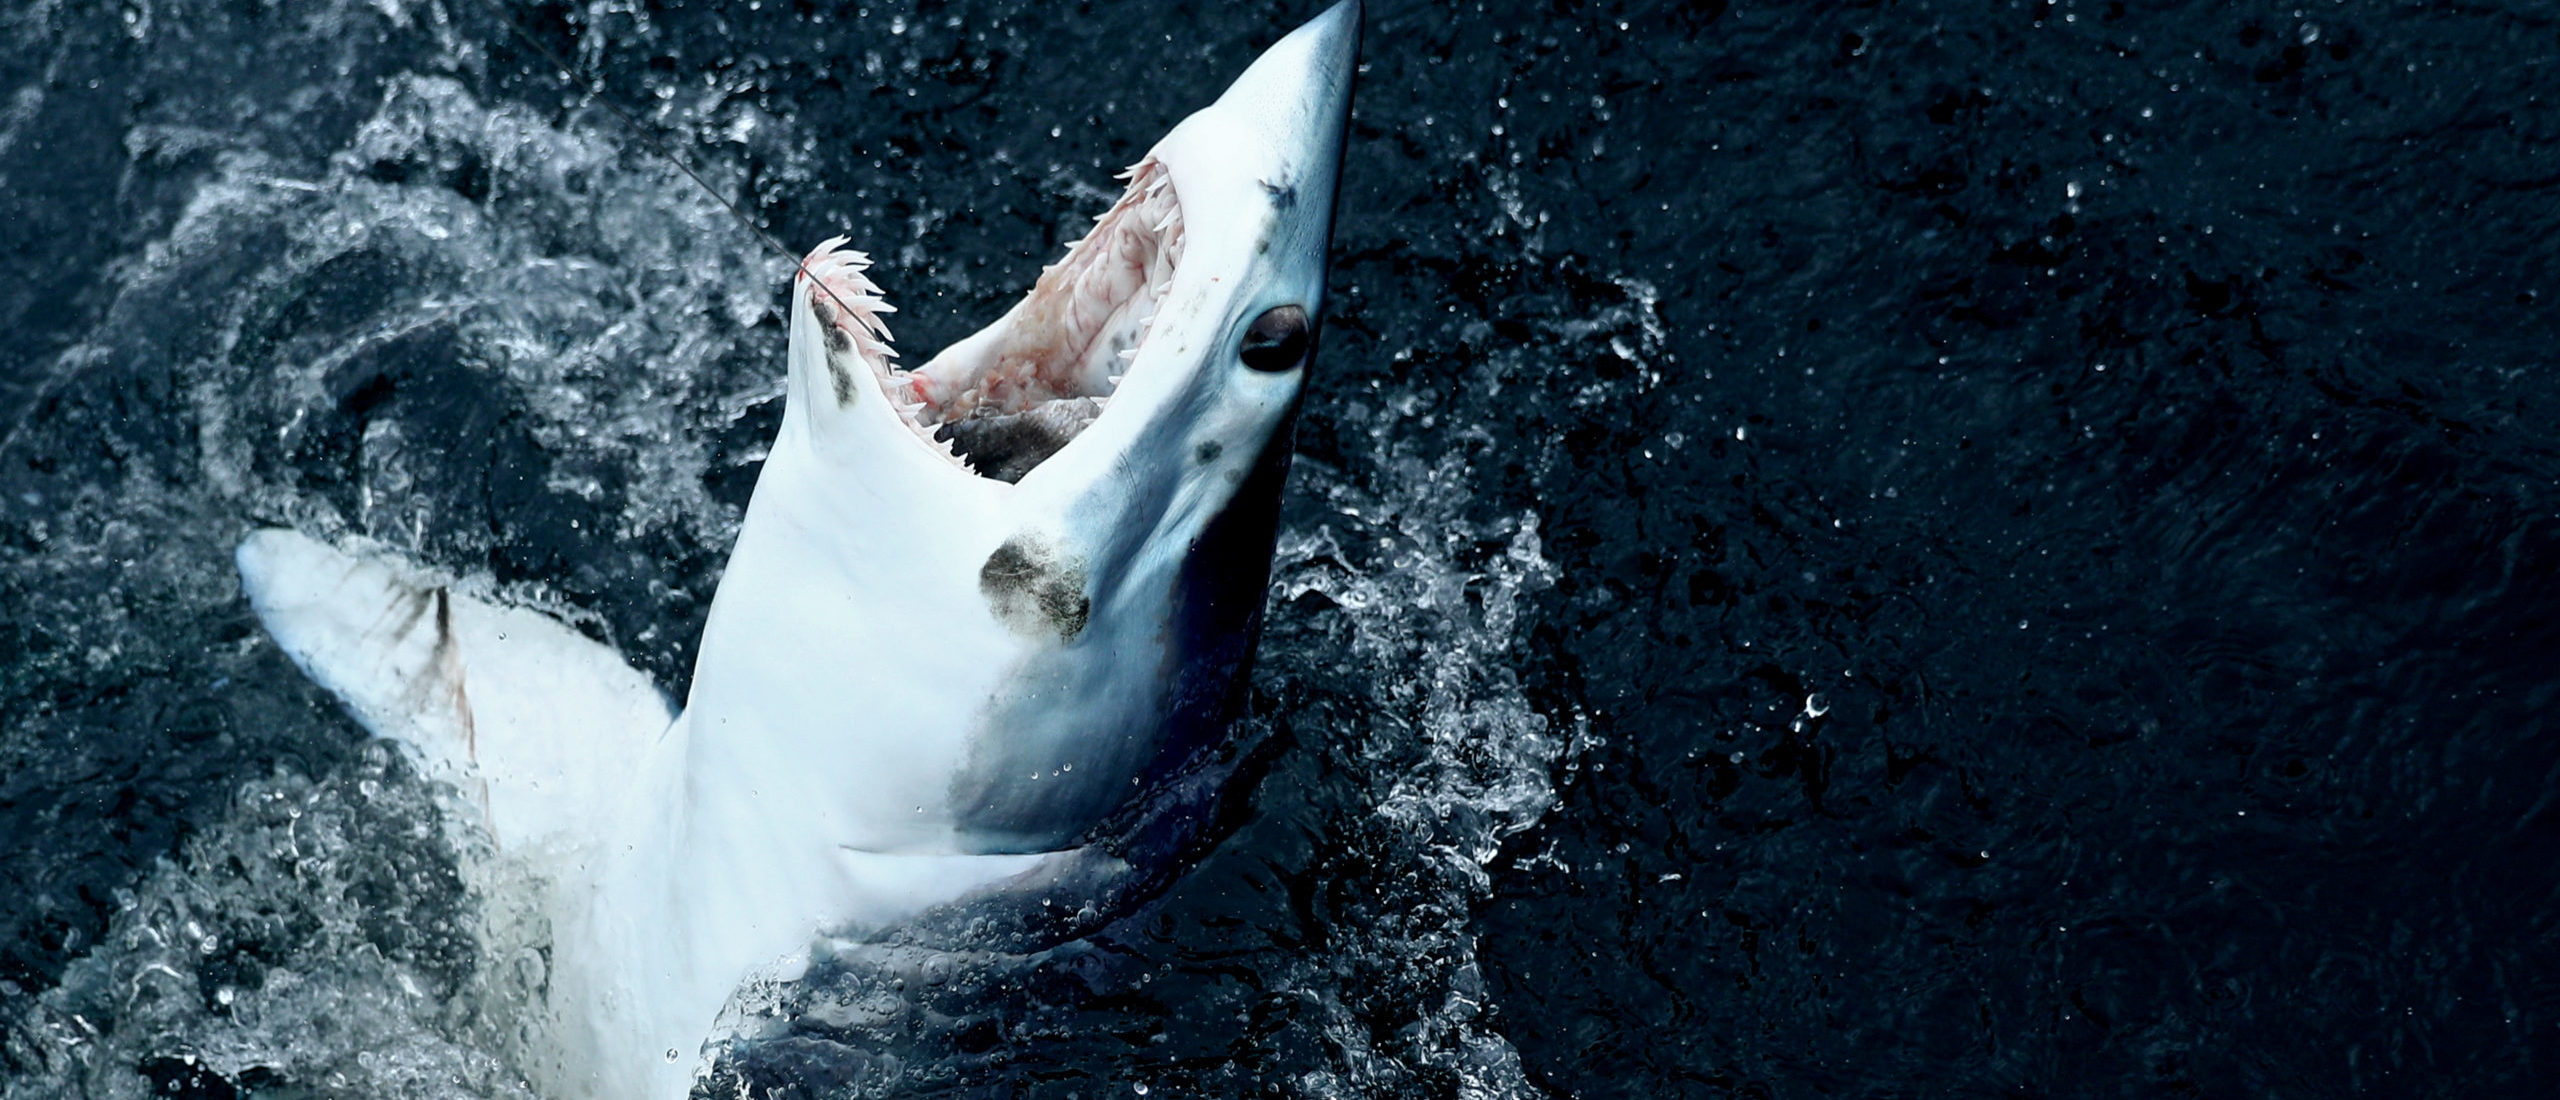 Officials Launch New Warning System After Record Number Of Shark